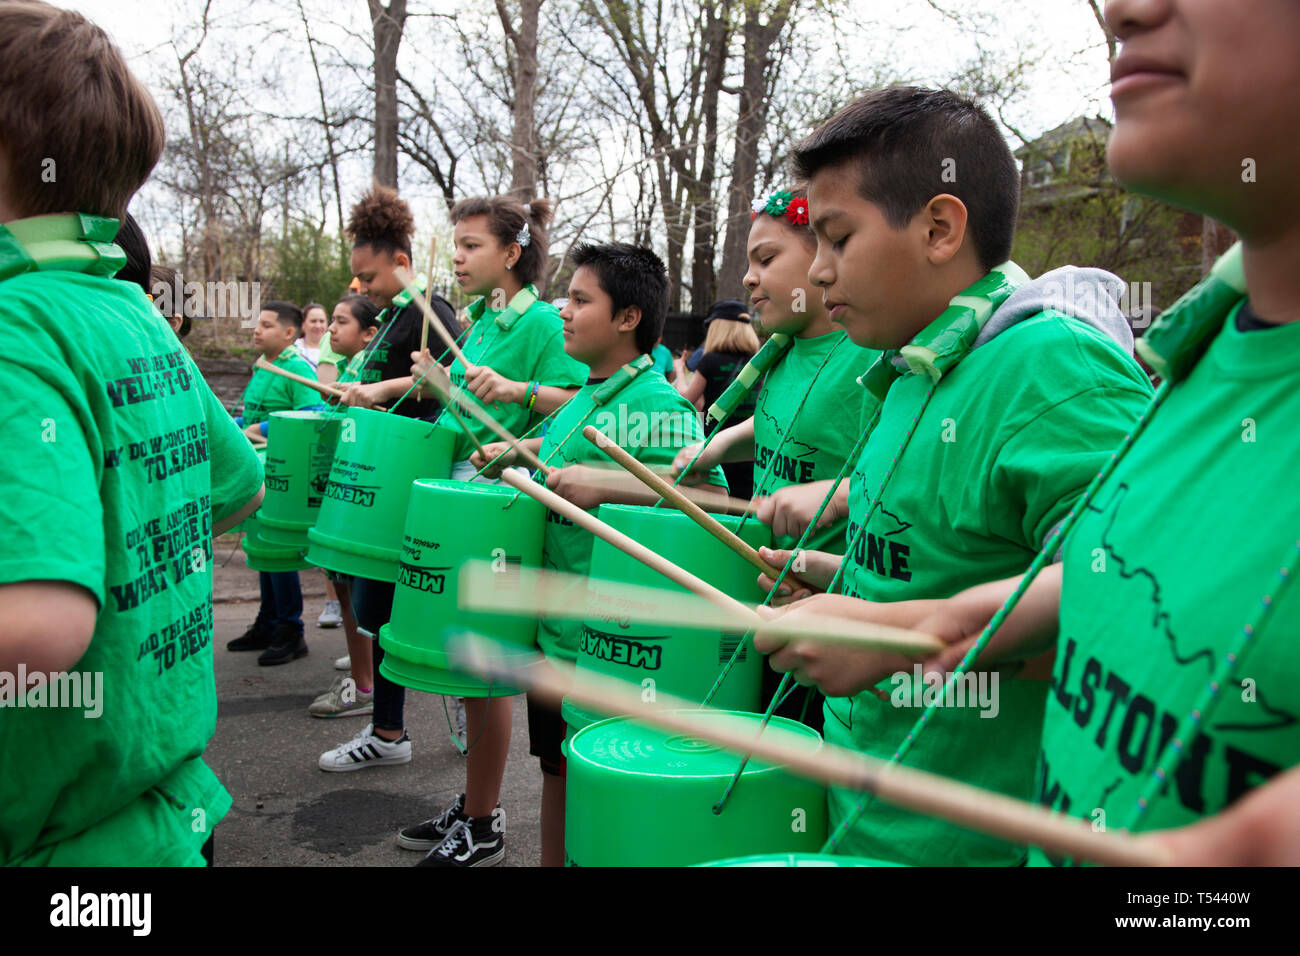 Students from Wellstone School in the Drumline using Menards Pails for drums at Cinco de Mayo. St Paul Minnesota MN USA Stock Photo